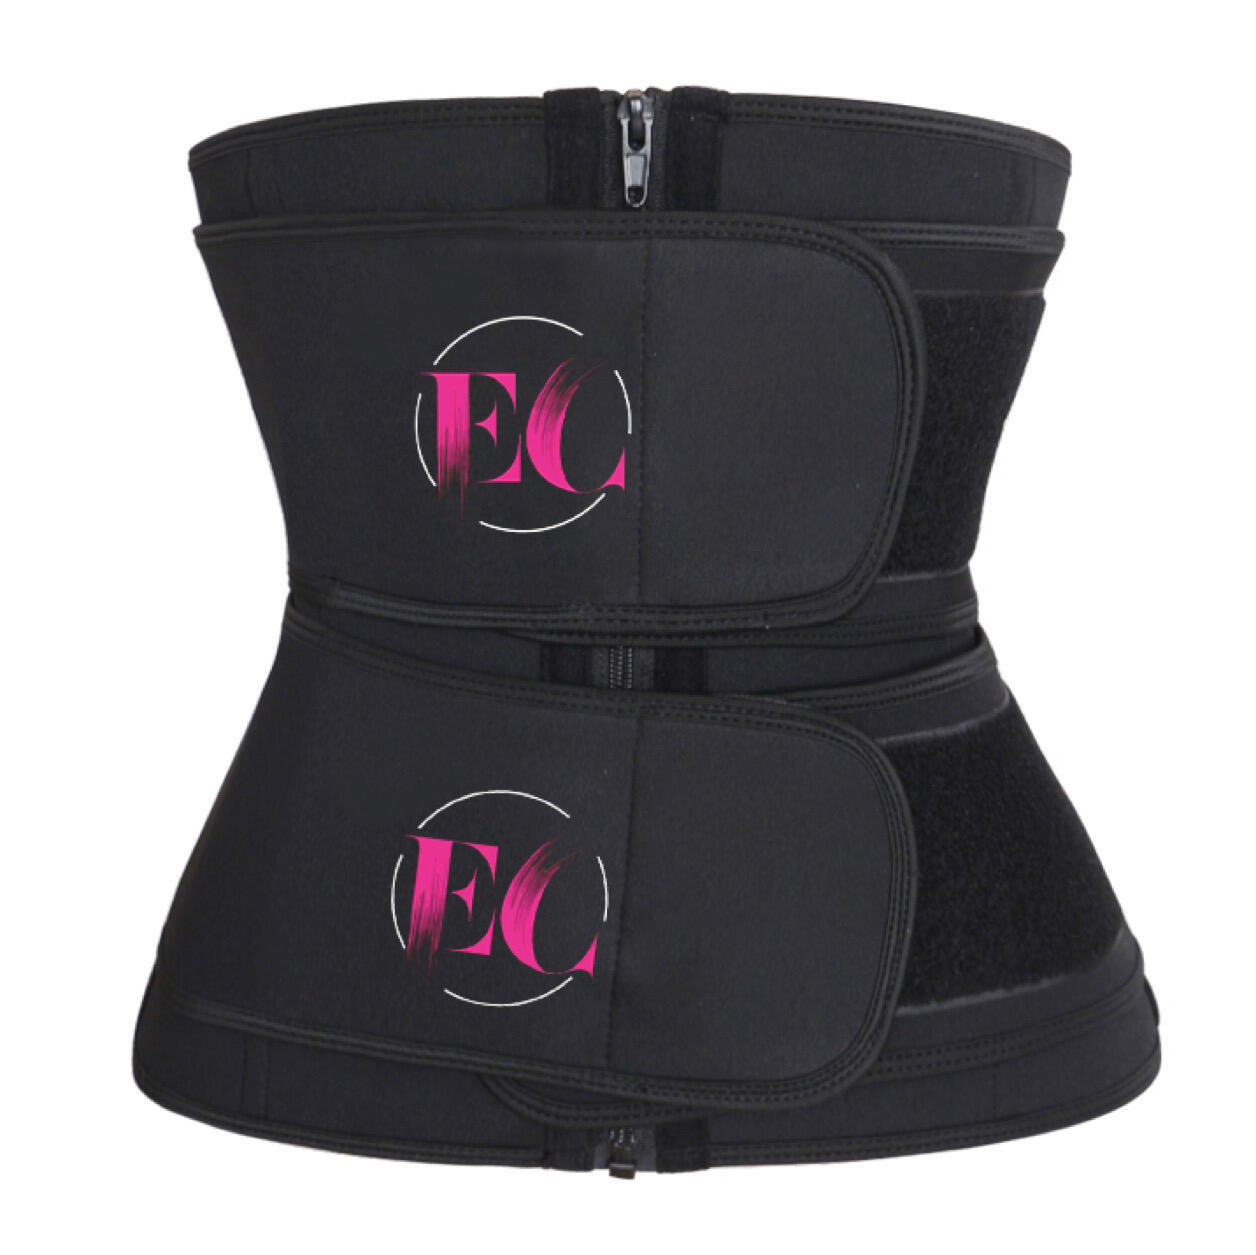 The 2 in One waist trainer $60.00